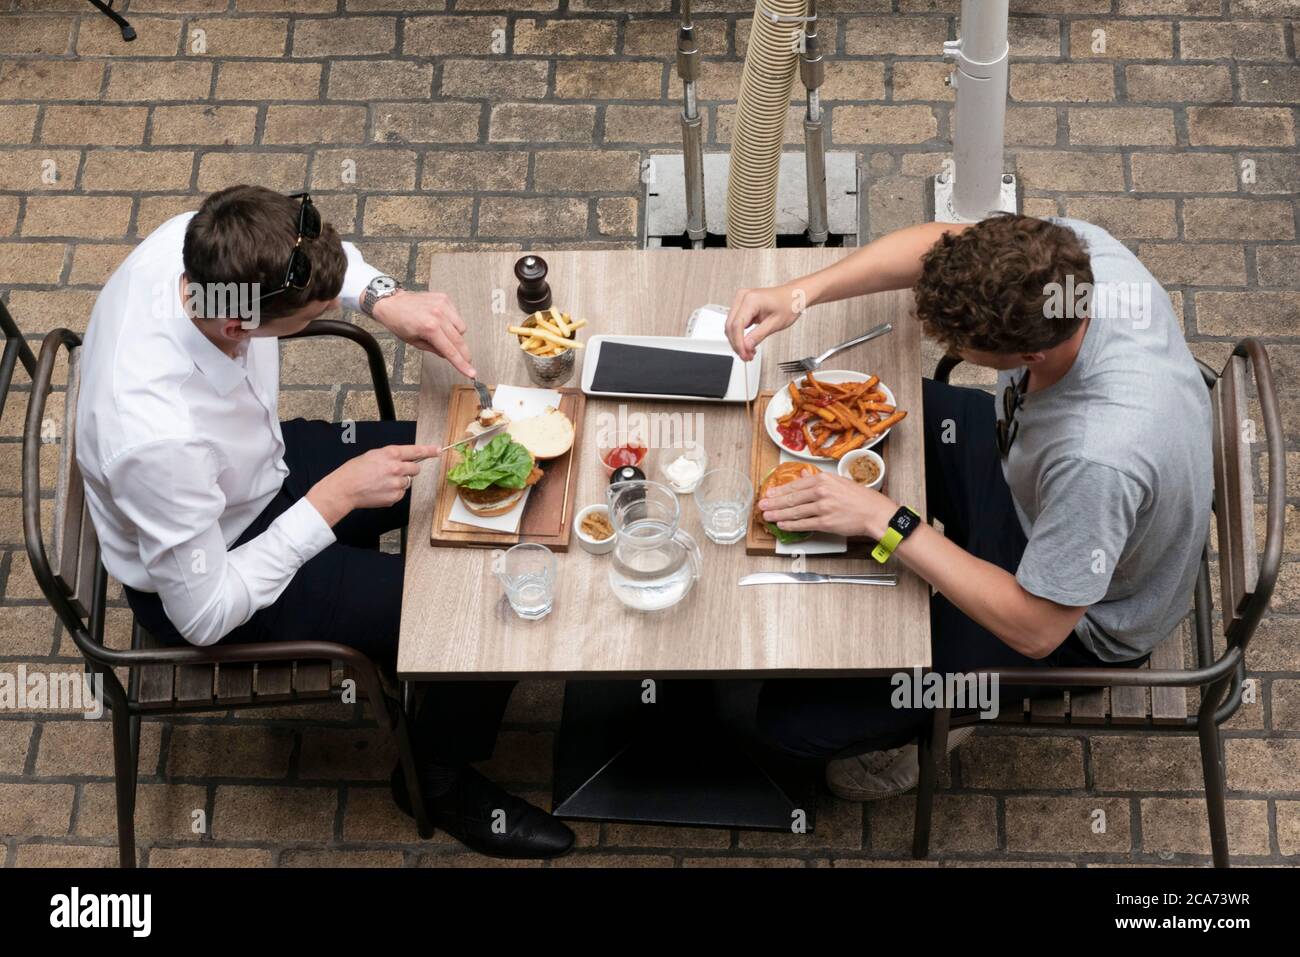 Diners eat food at outdoor restaurant tables in Kingly Court during the Eat Out to Help Out scheme offering diners a discount off meals to help boost restaurants and pubs post-lockdown. Stock Photo